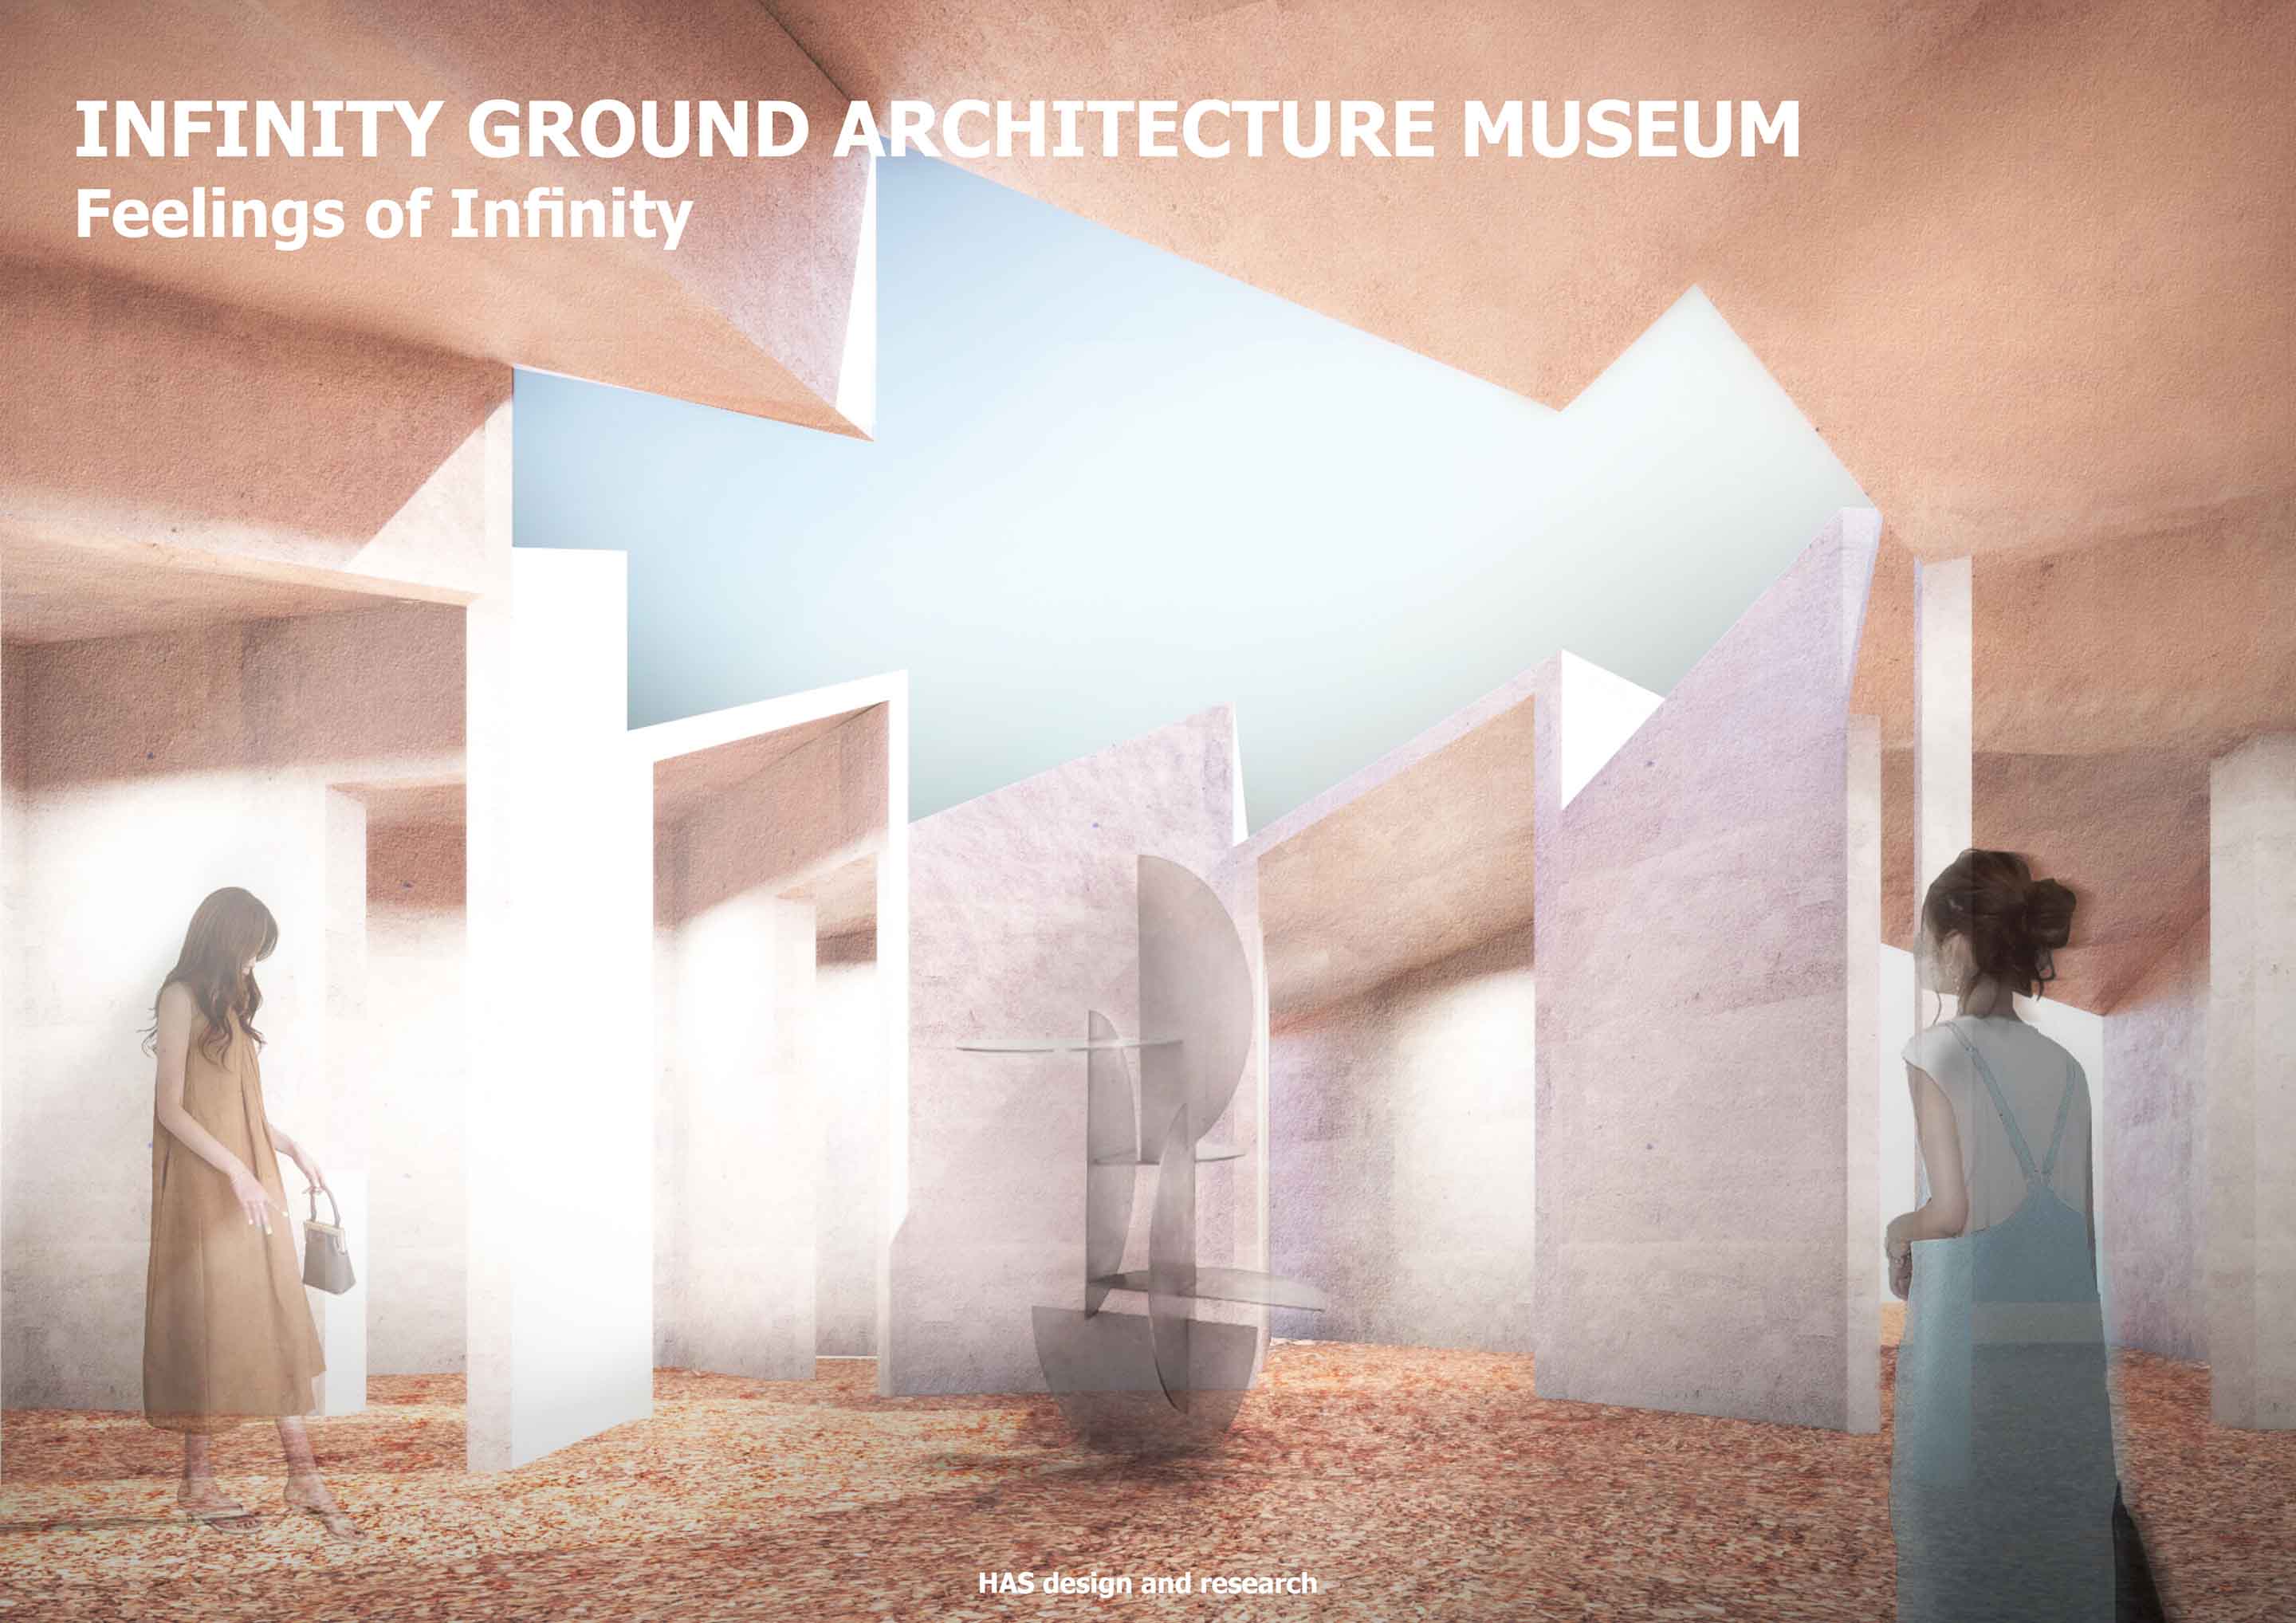 06 Infinity Ground Architecture Museum, Bangkok, Thailand ©HAS design and research